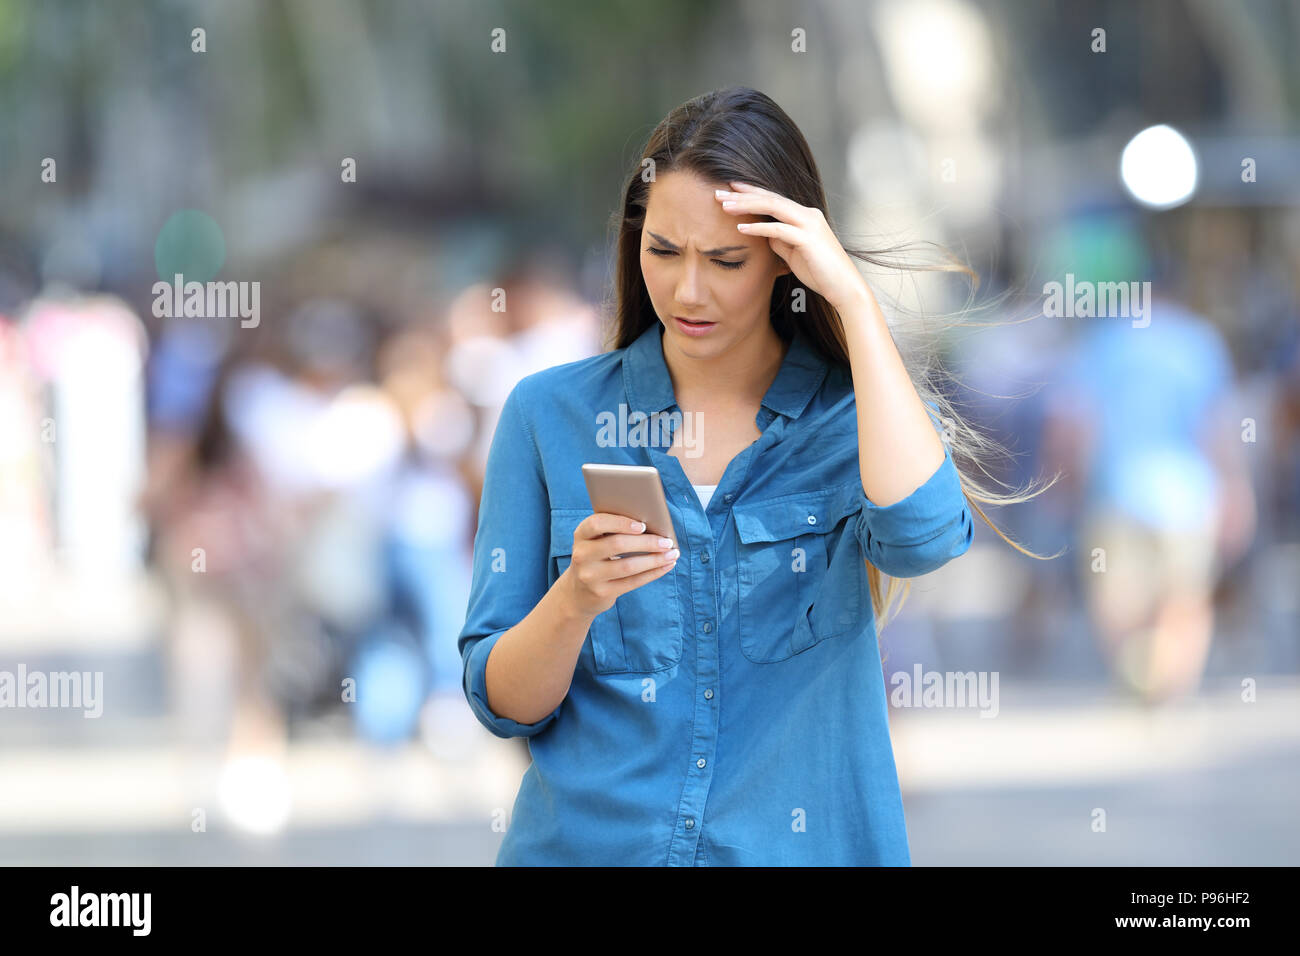 Front view portrait of a worried woman checking smart phone messages walking on the street Stock Photo